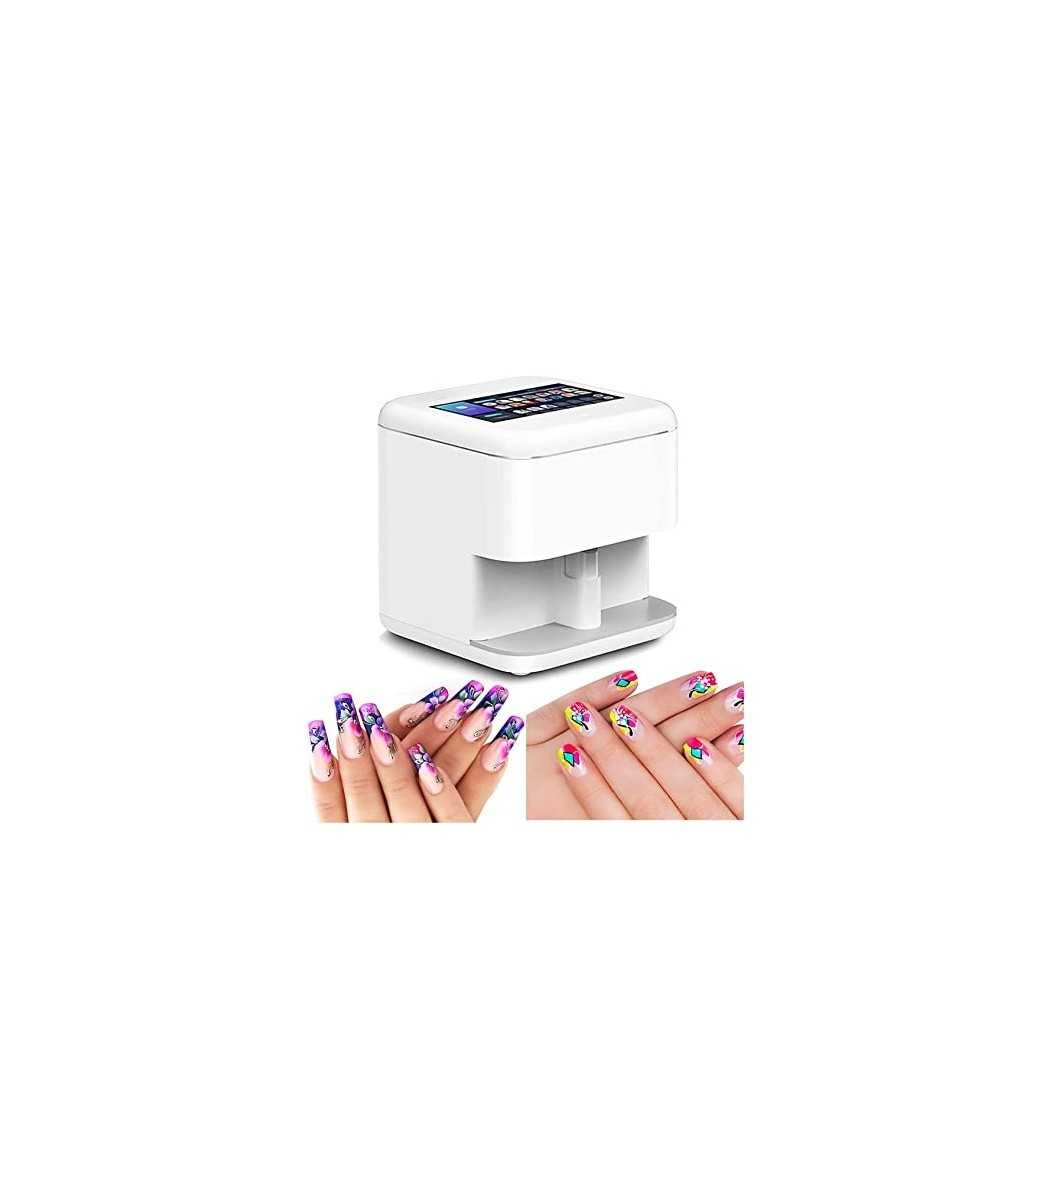 PENNY73 Nail Art Printer Machine Touch Screen 3D Digital Intelligent Nail  Printer Manicure Salon Set with Pack of Nail Polish and Nail Dryer